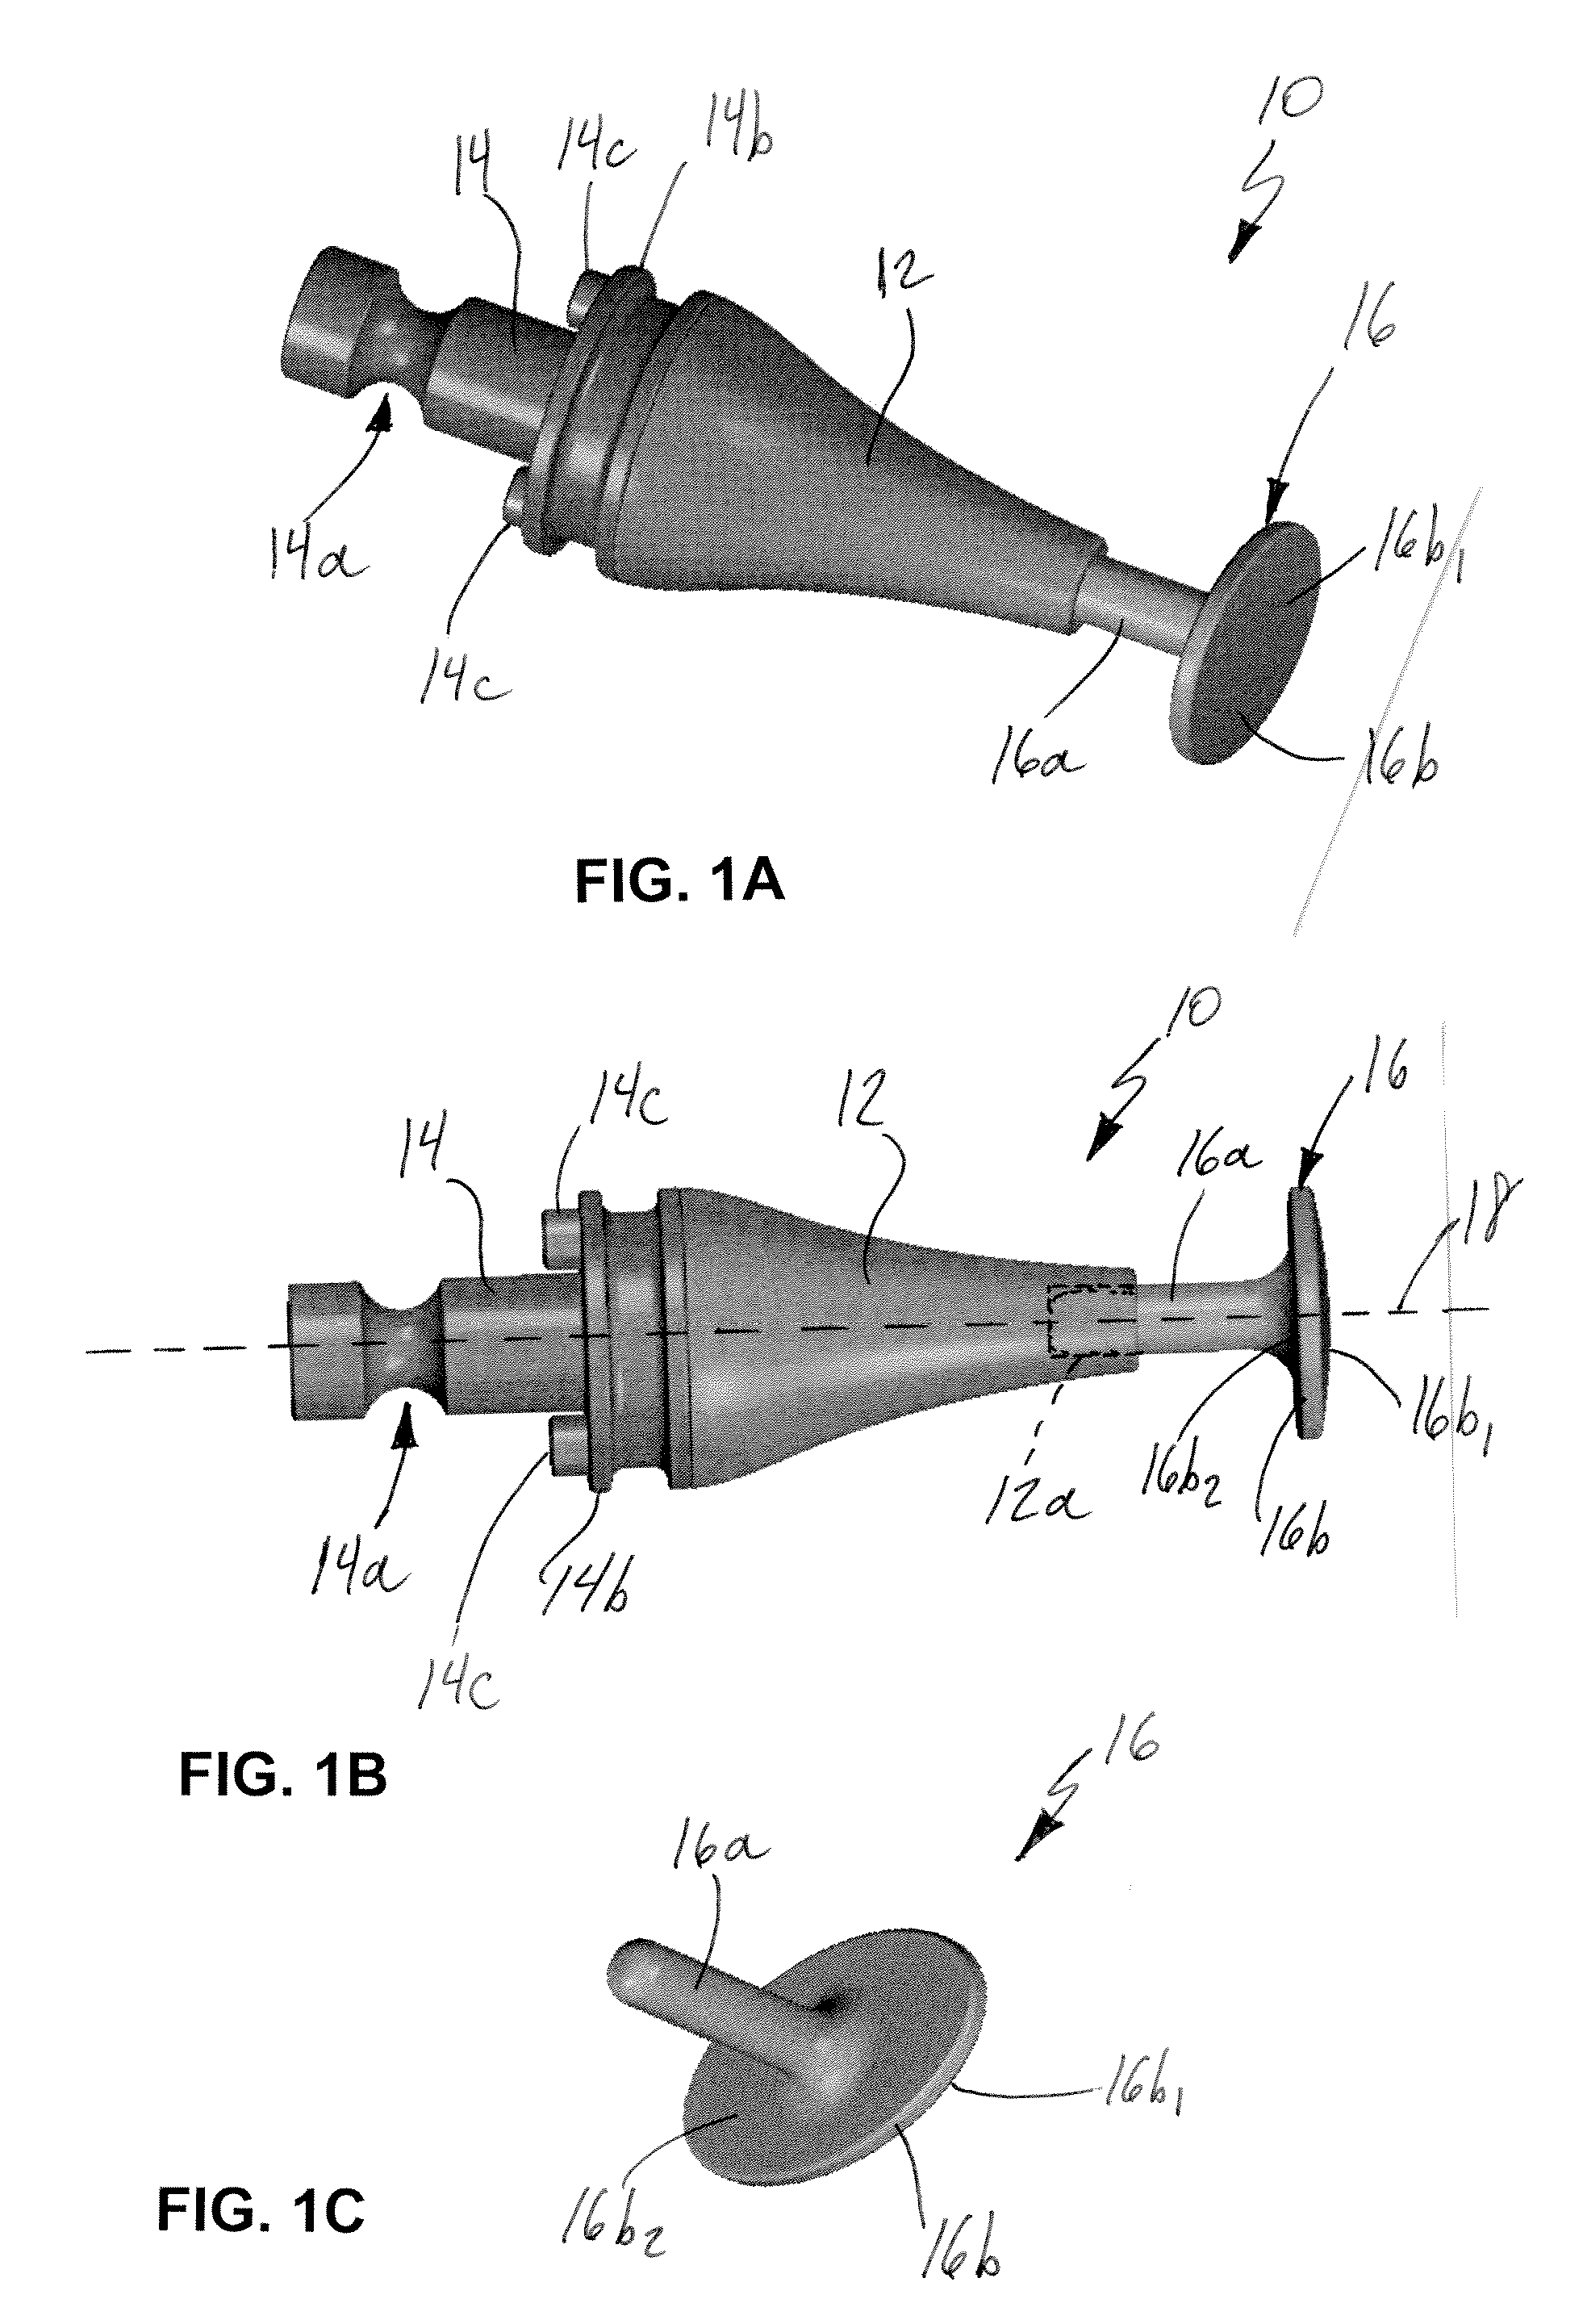 Device and Method for Vascular Tamponade Following Percutaneous Puncture